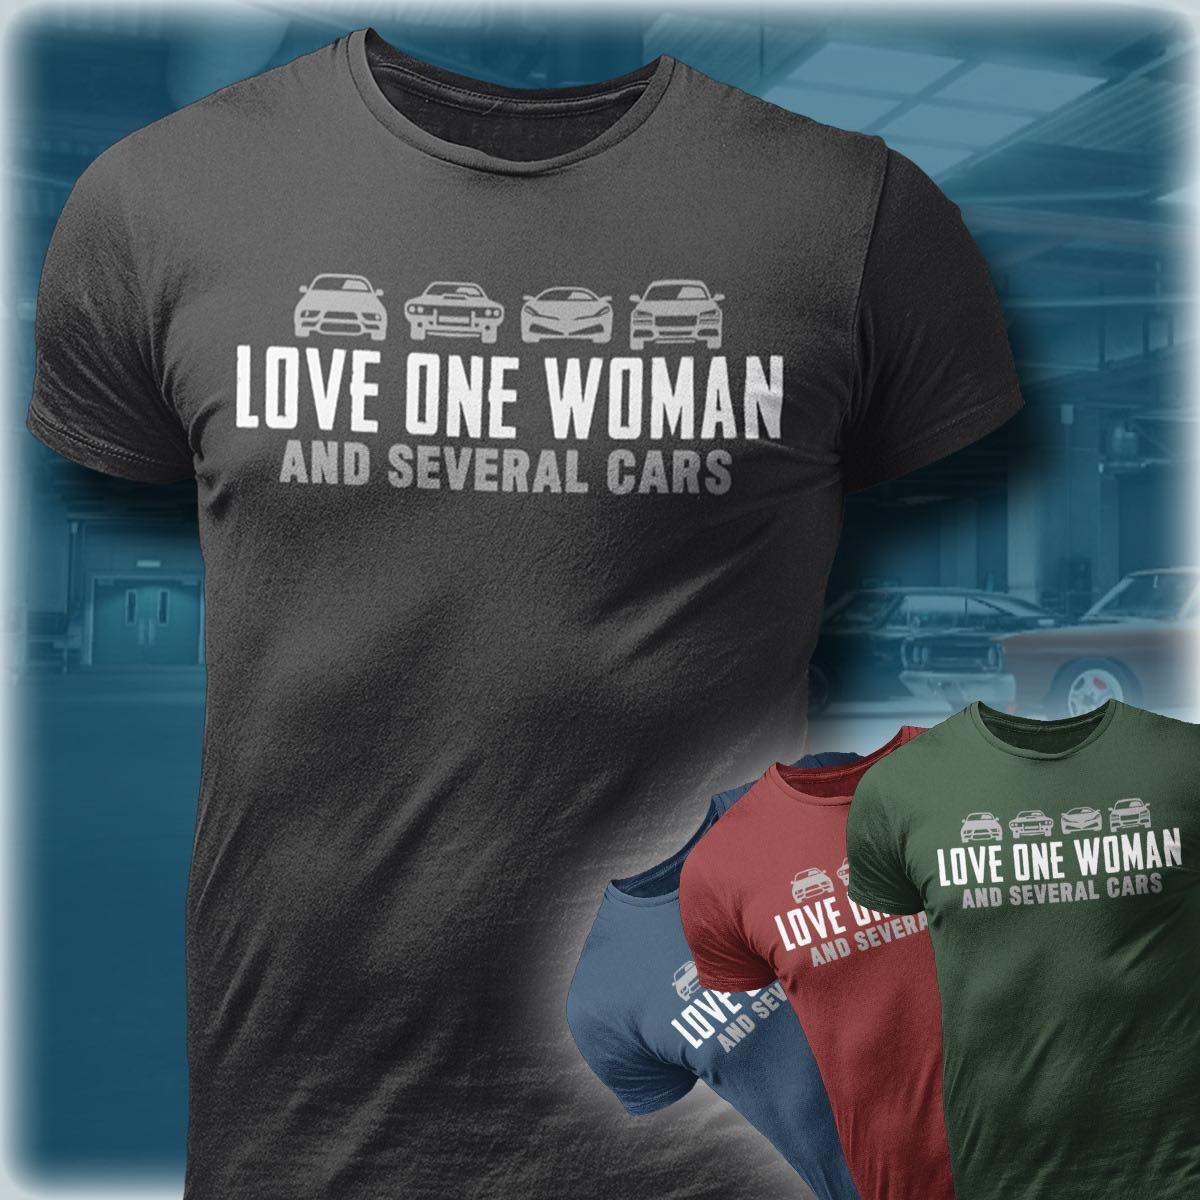 Love one woman and several cars